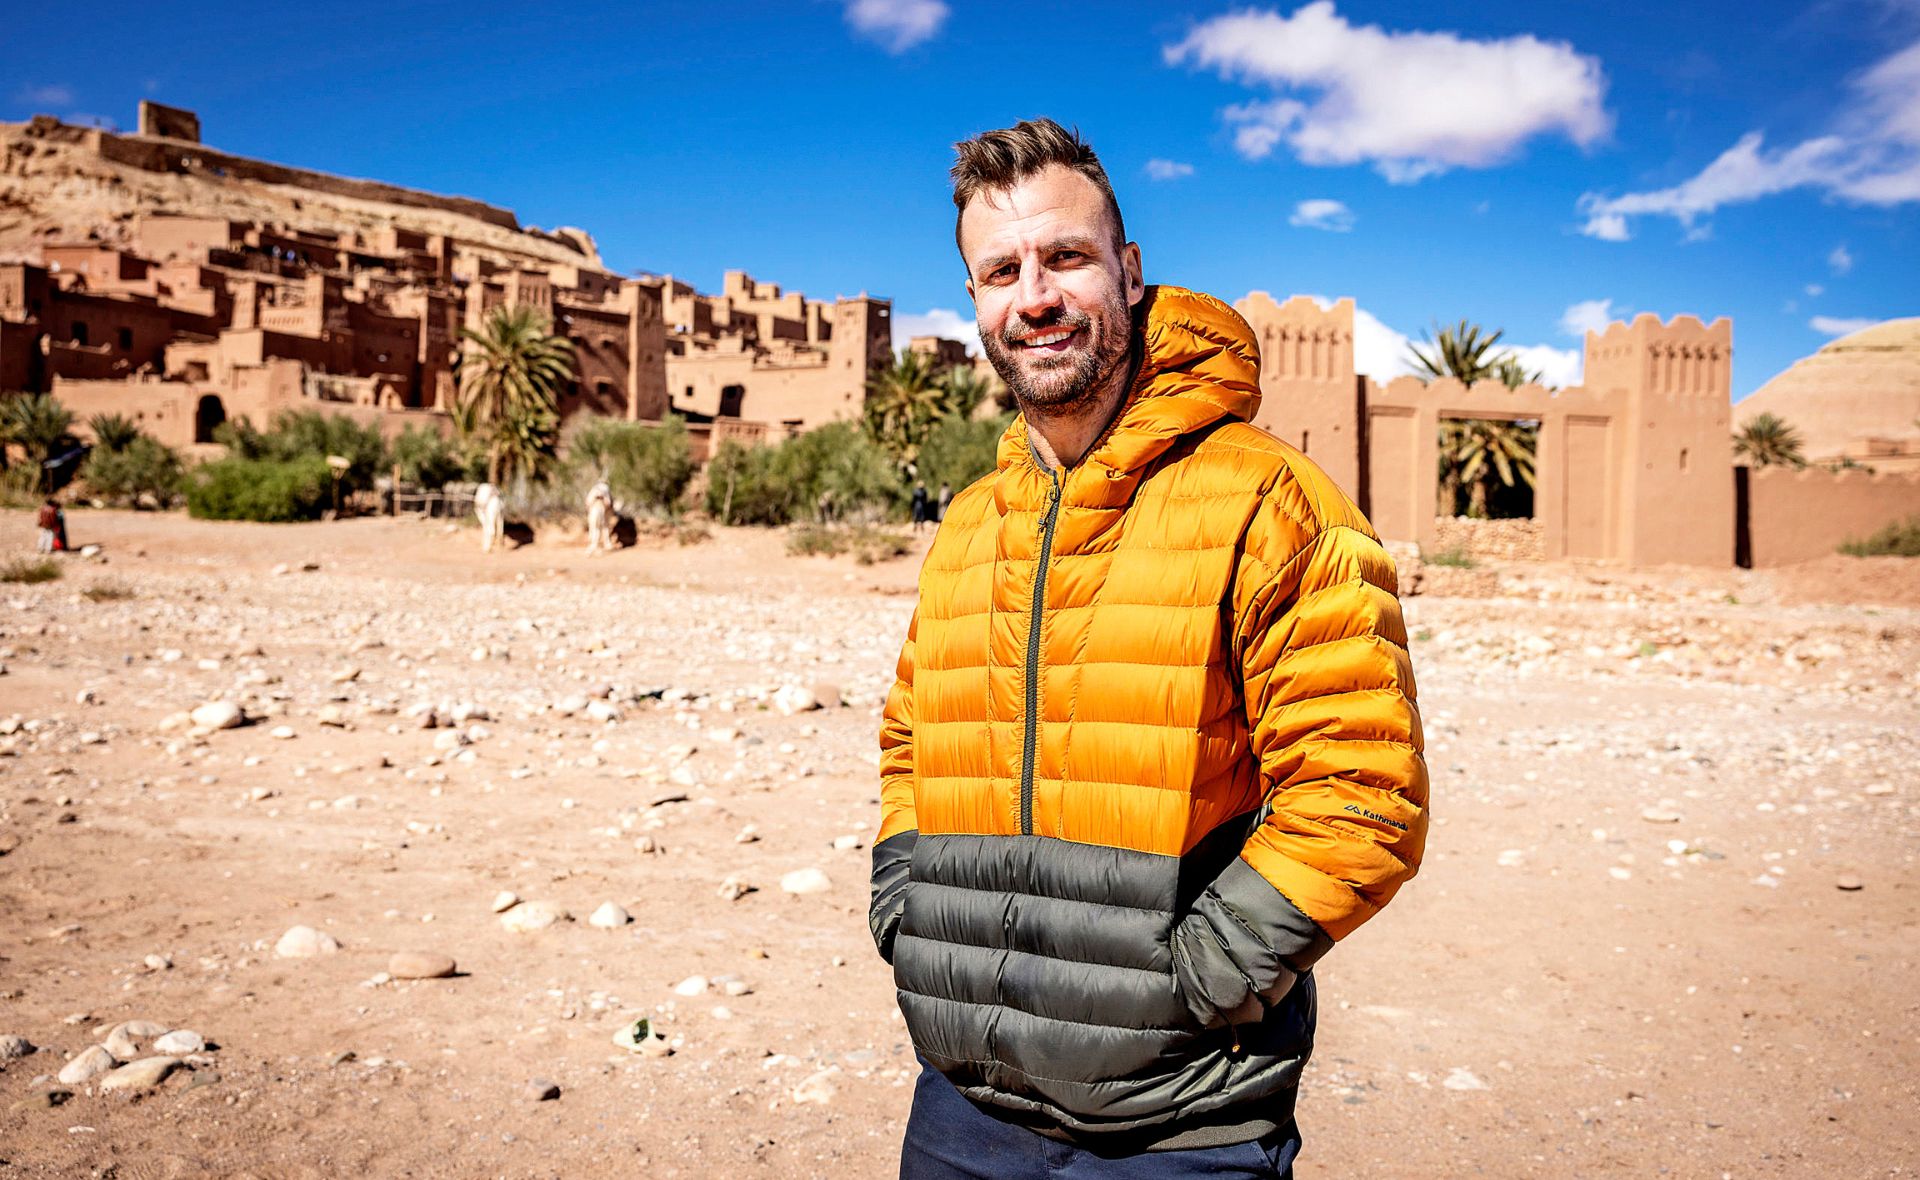 EXCLUSIVE: Beau Ryan speaks about being separated from his family while filming The Amazing Race